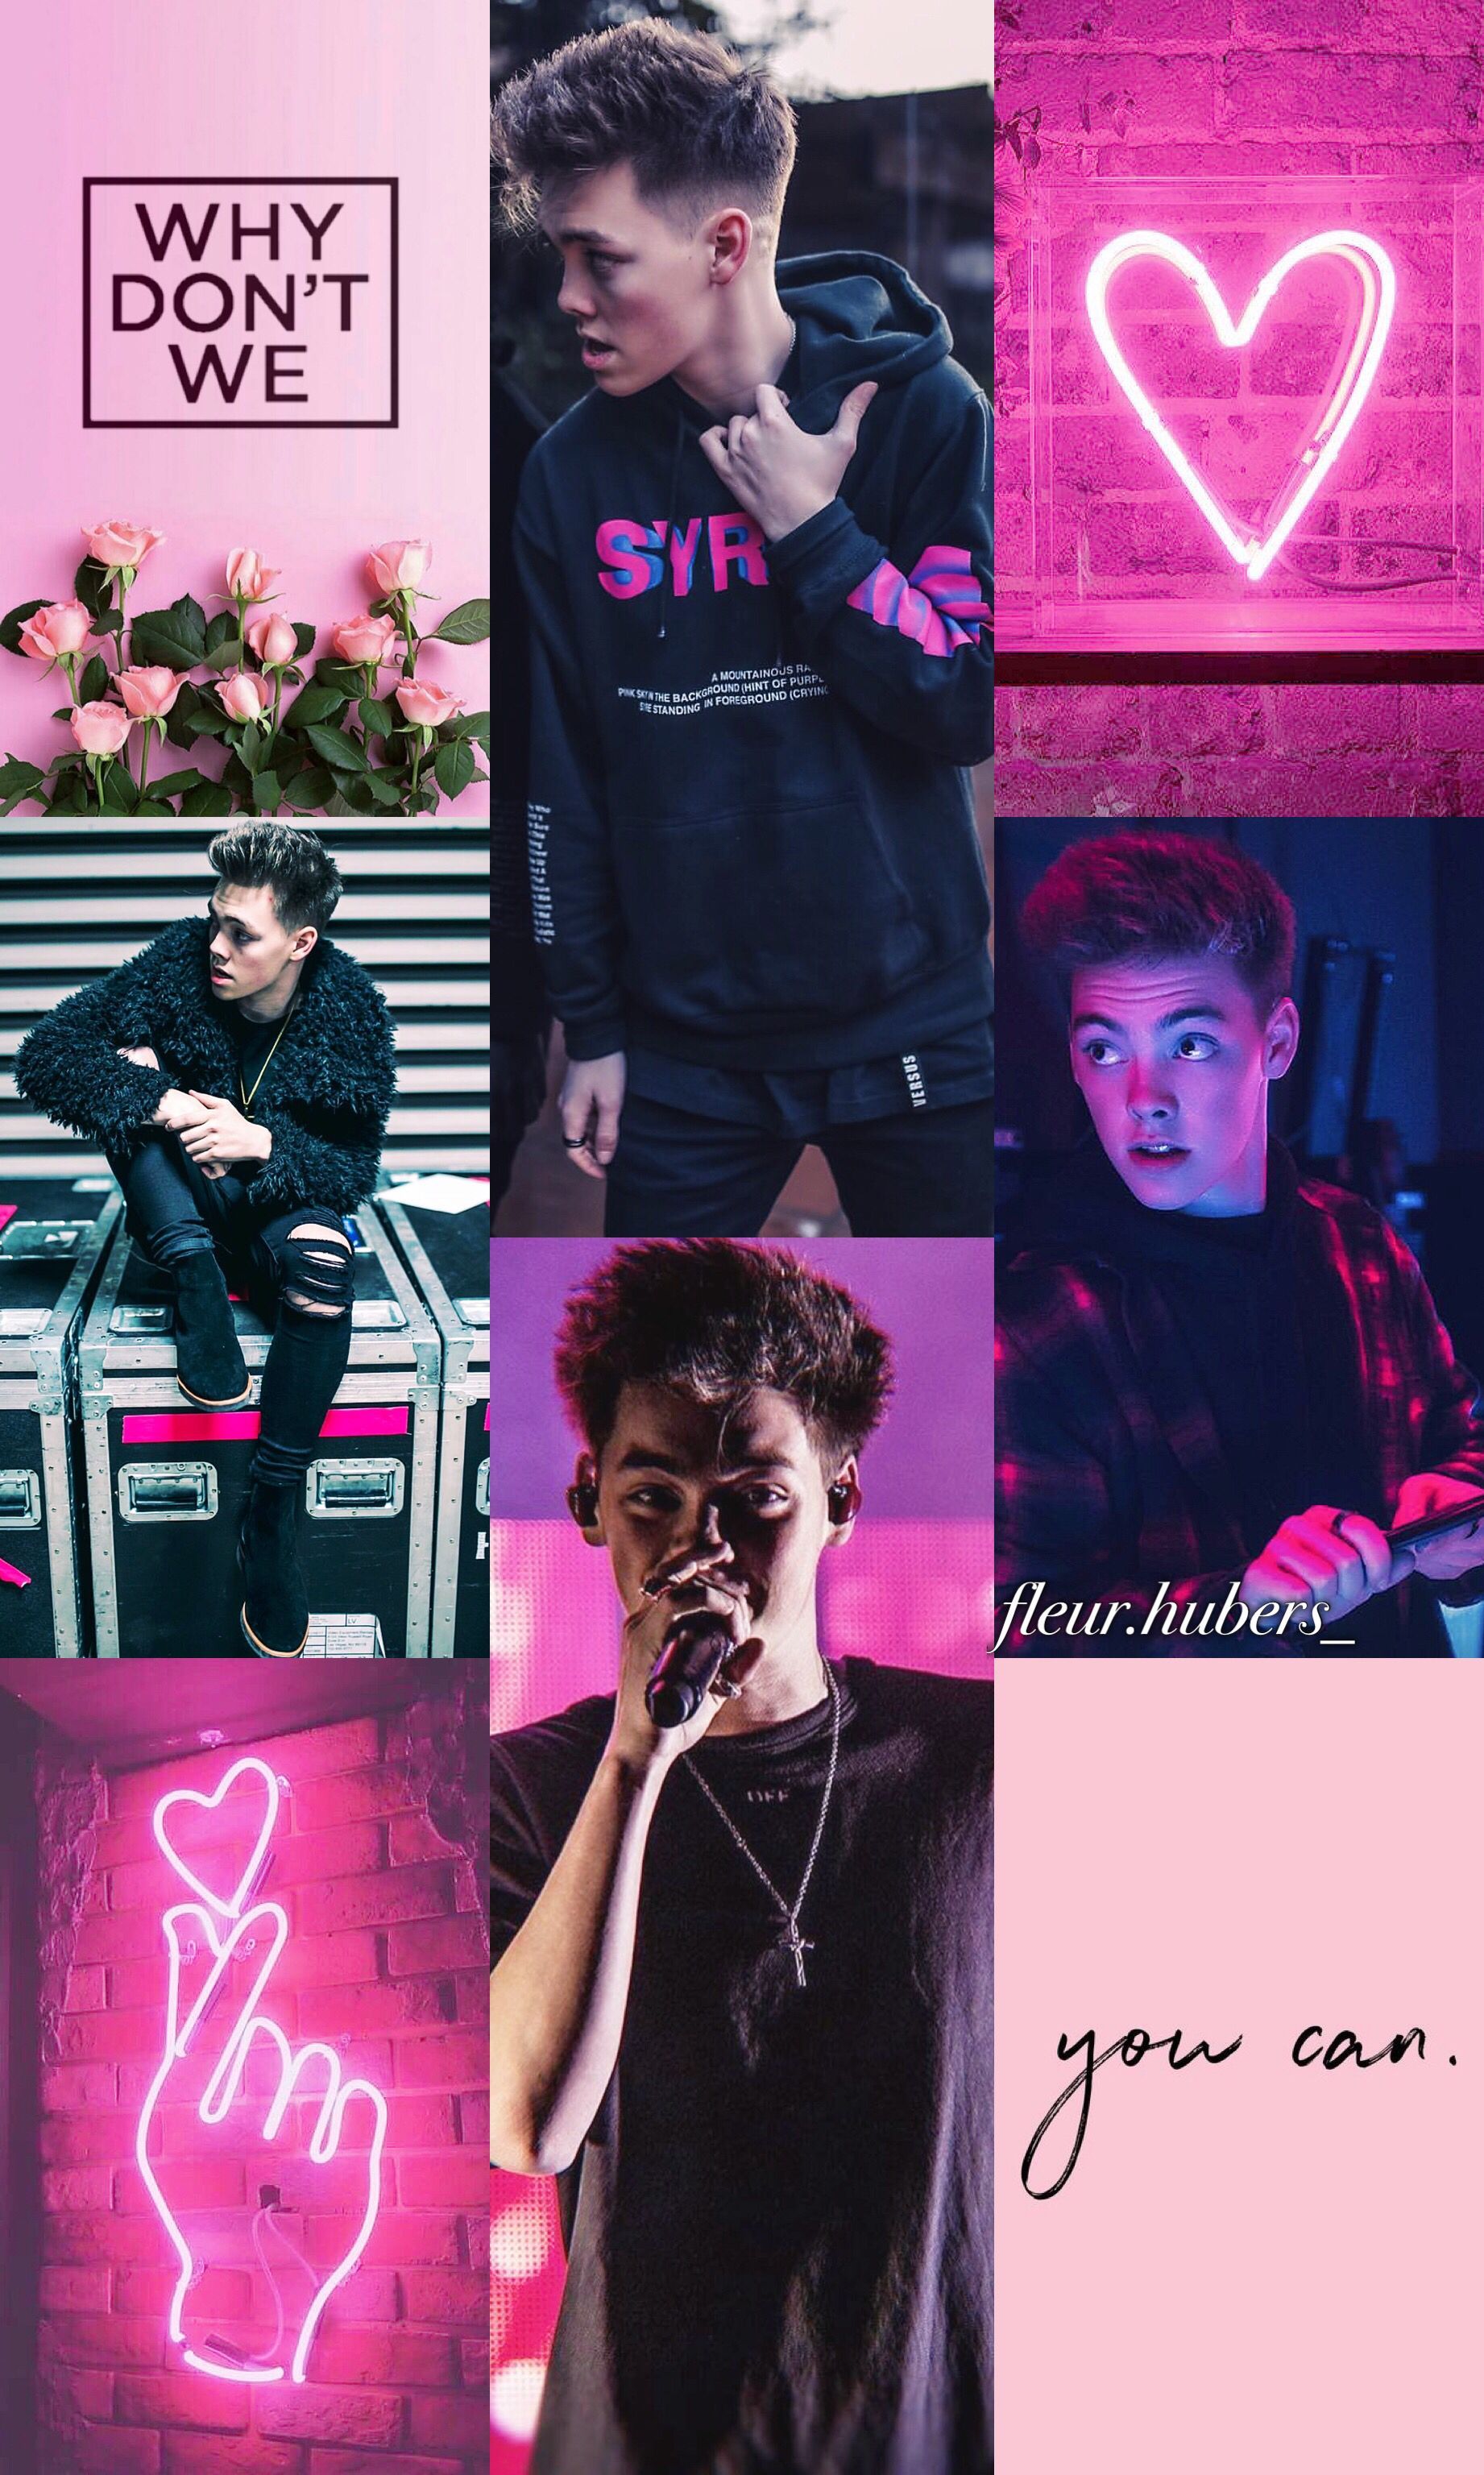 Colors. Zach herron, Wdw, Why dont we band